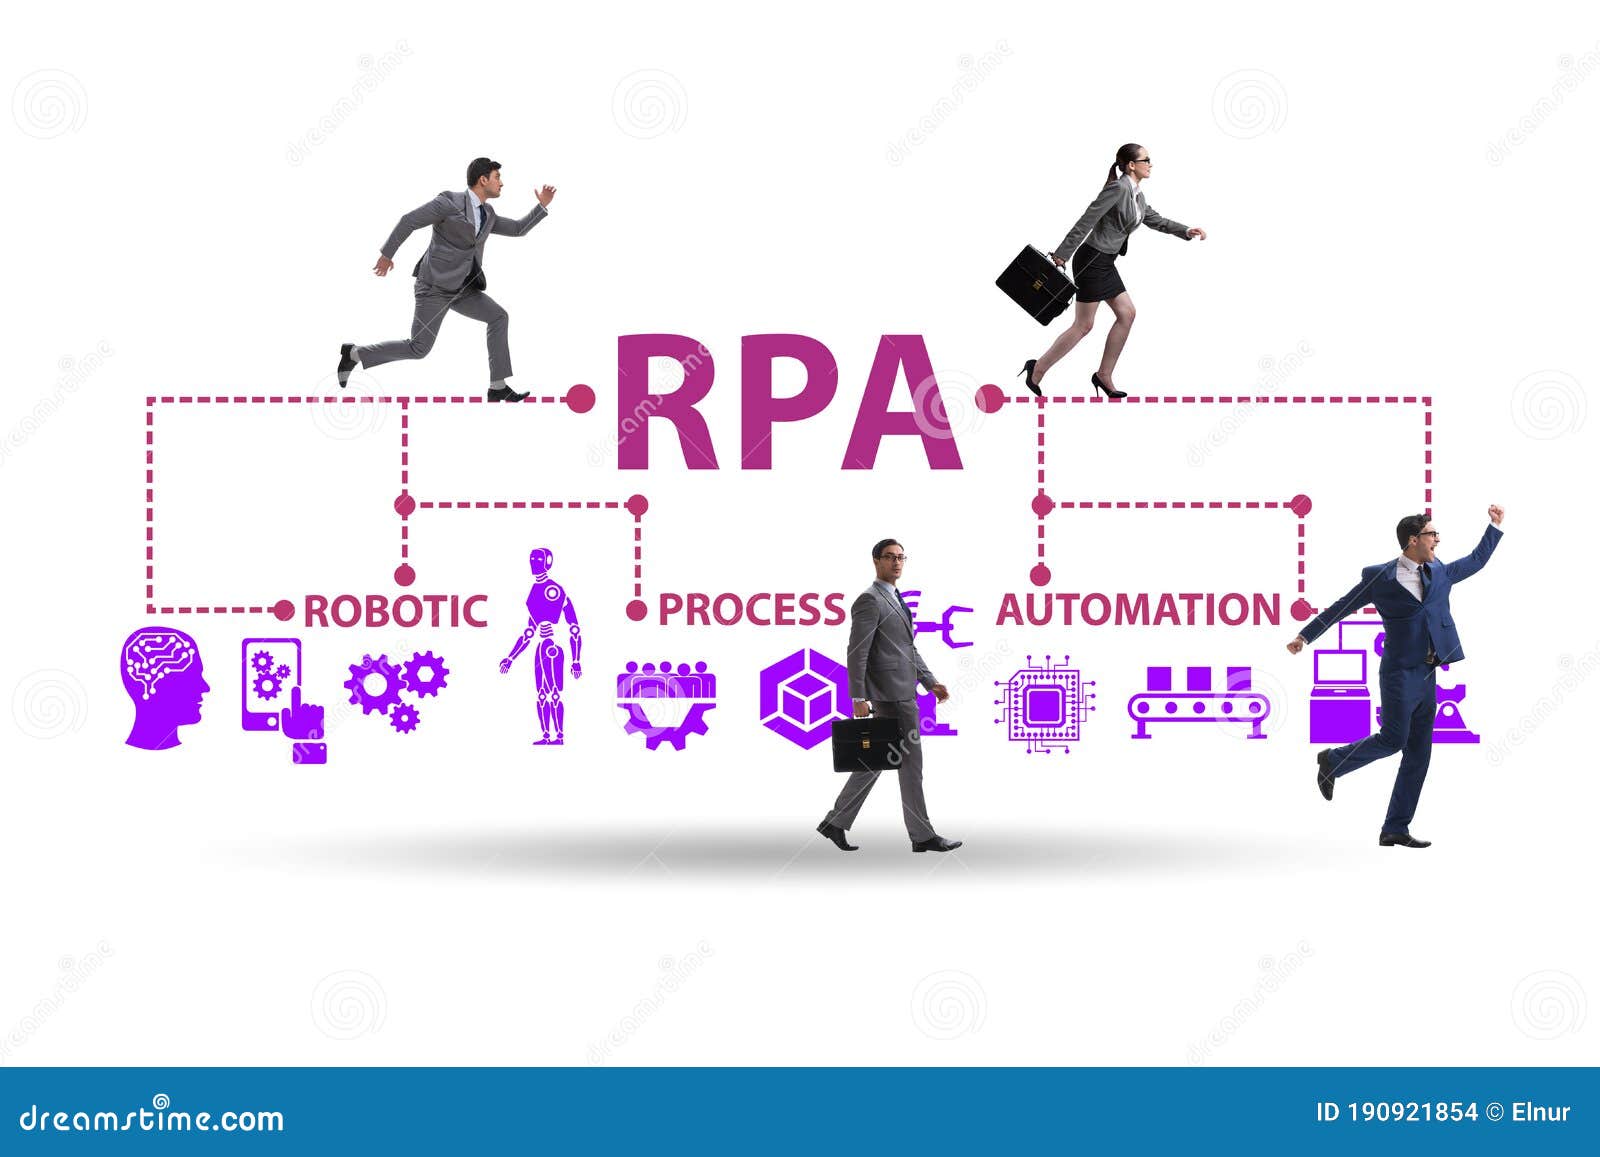 concept of rpa - robotic process automation